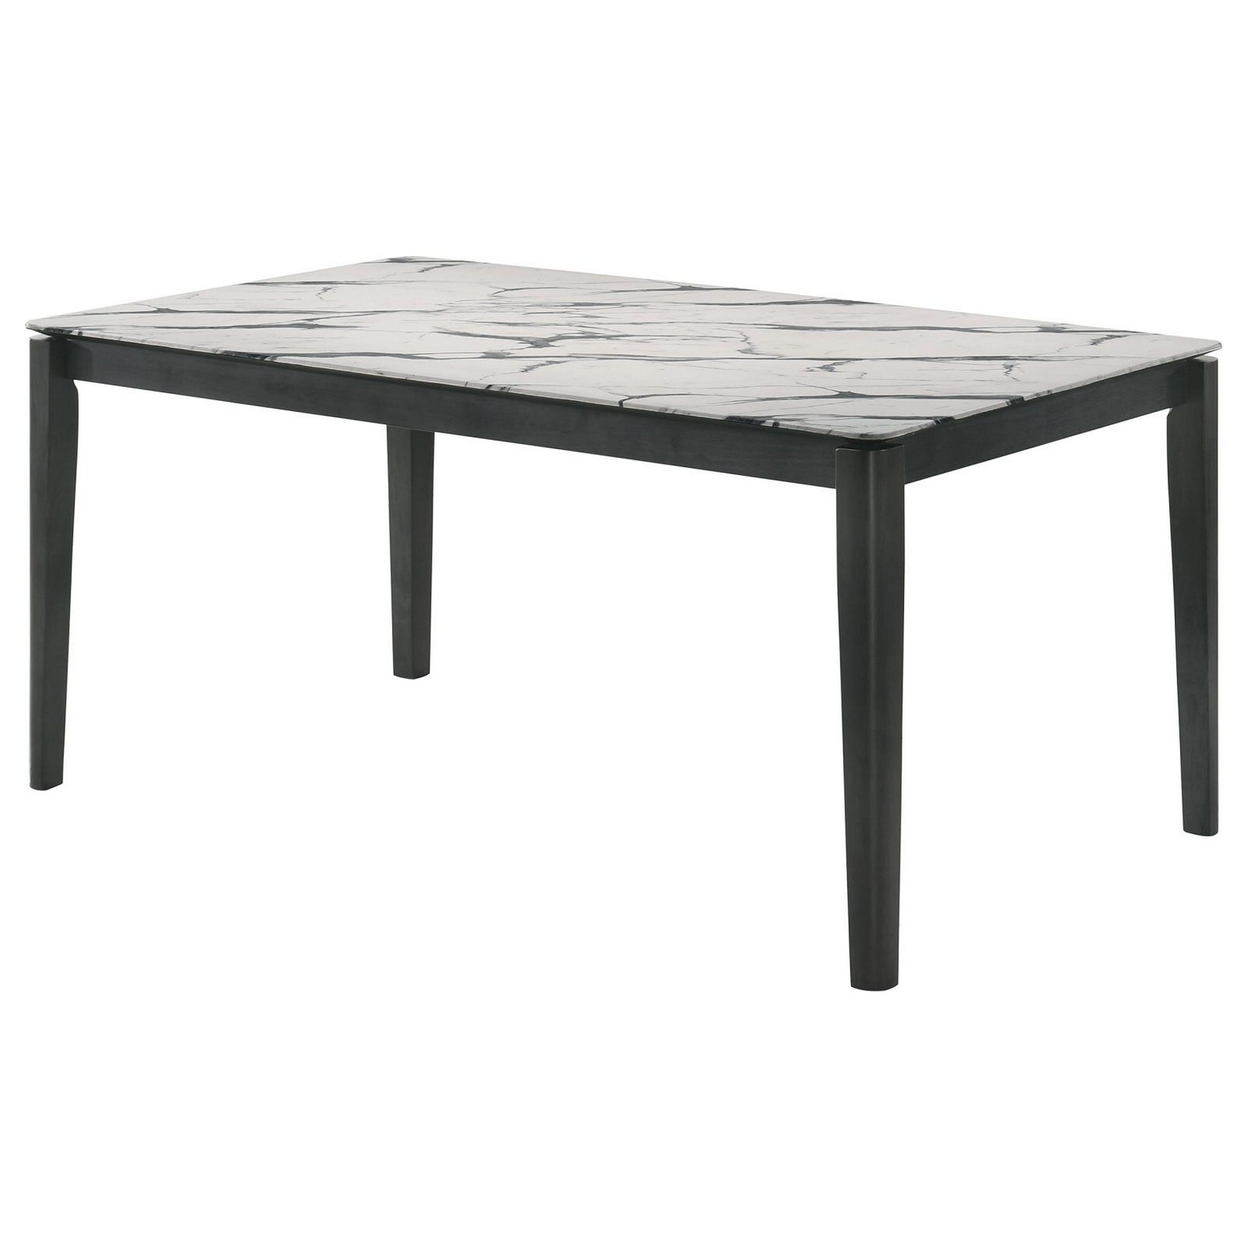 Abi 63 Inch Dining Table, 6 Seater, Beveled Top, Faux Marble Finish, Gray -Saltoro Sherpi